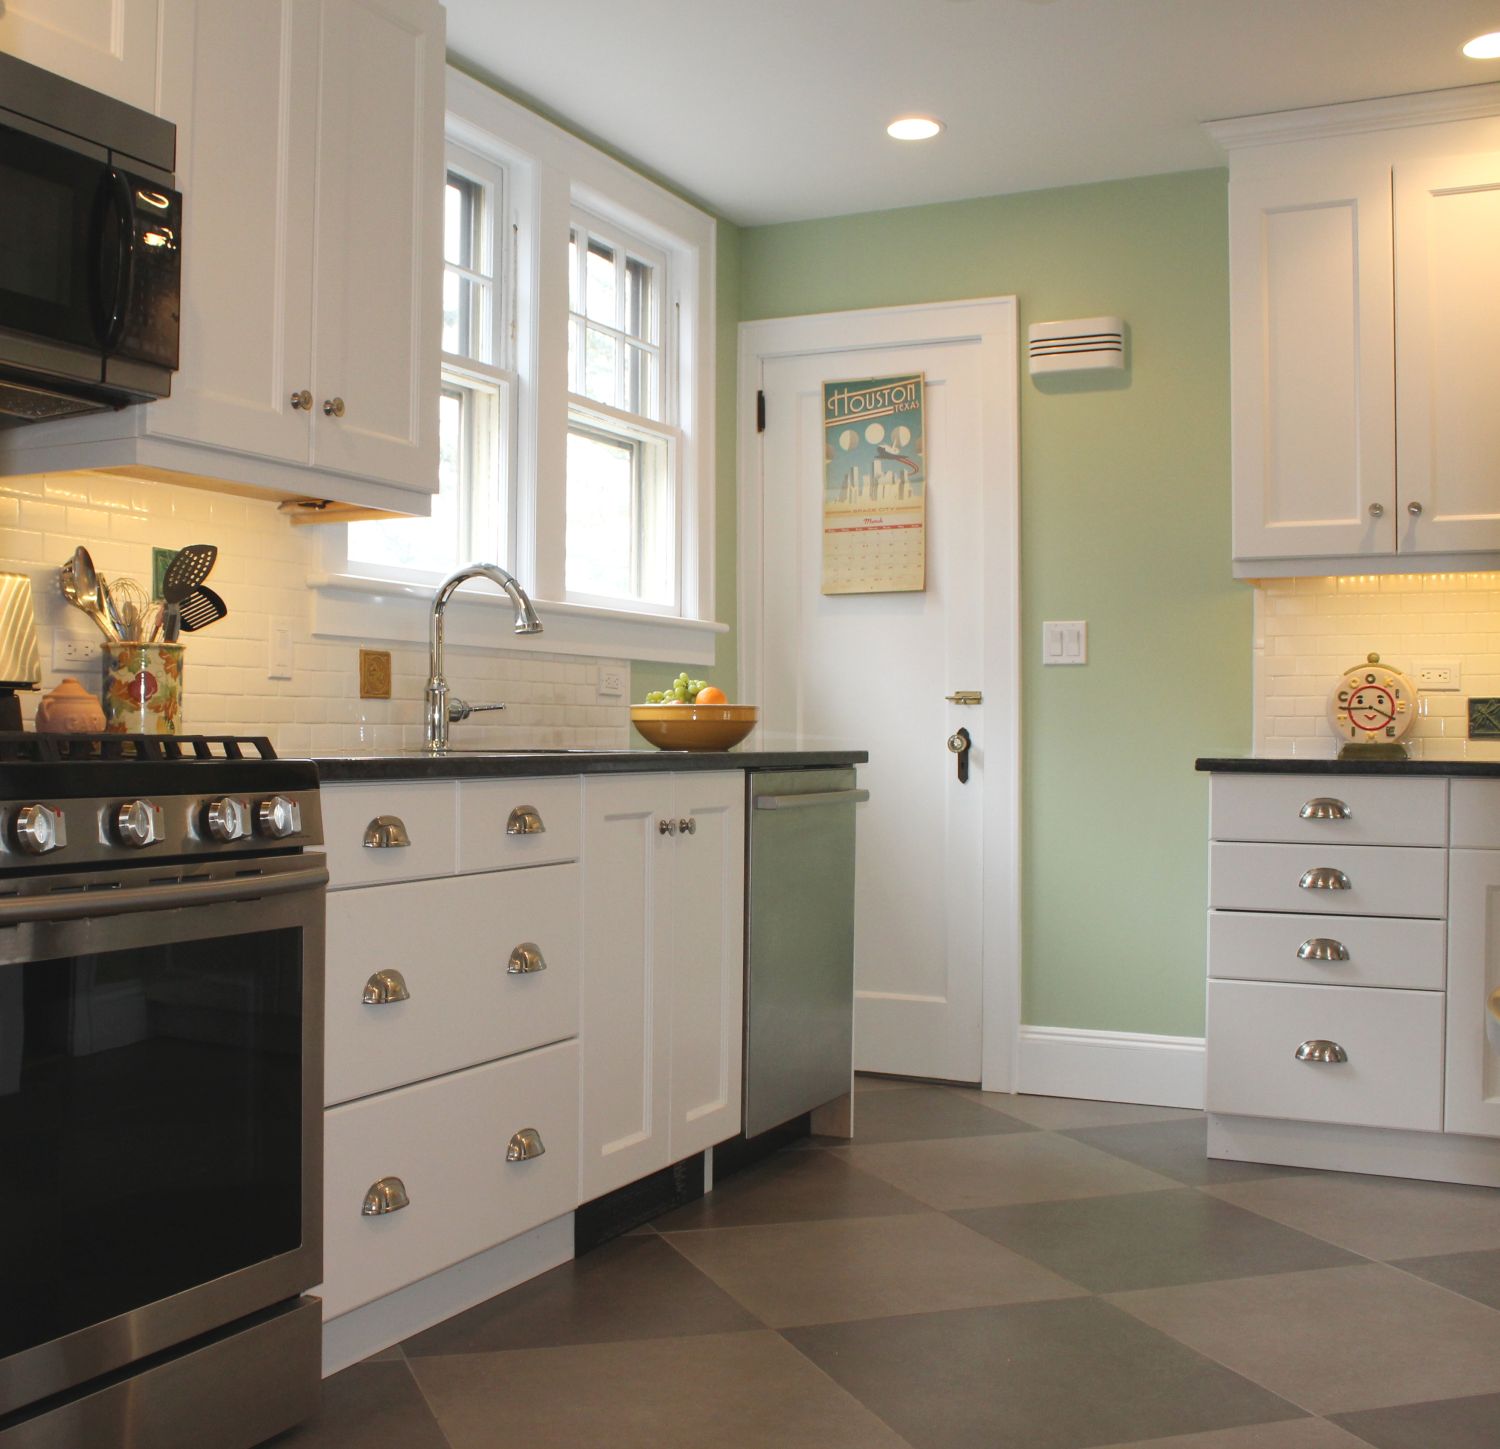 A kitchen with a checkered floor